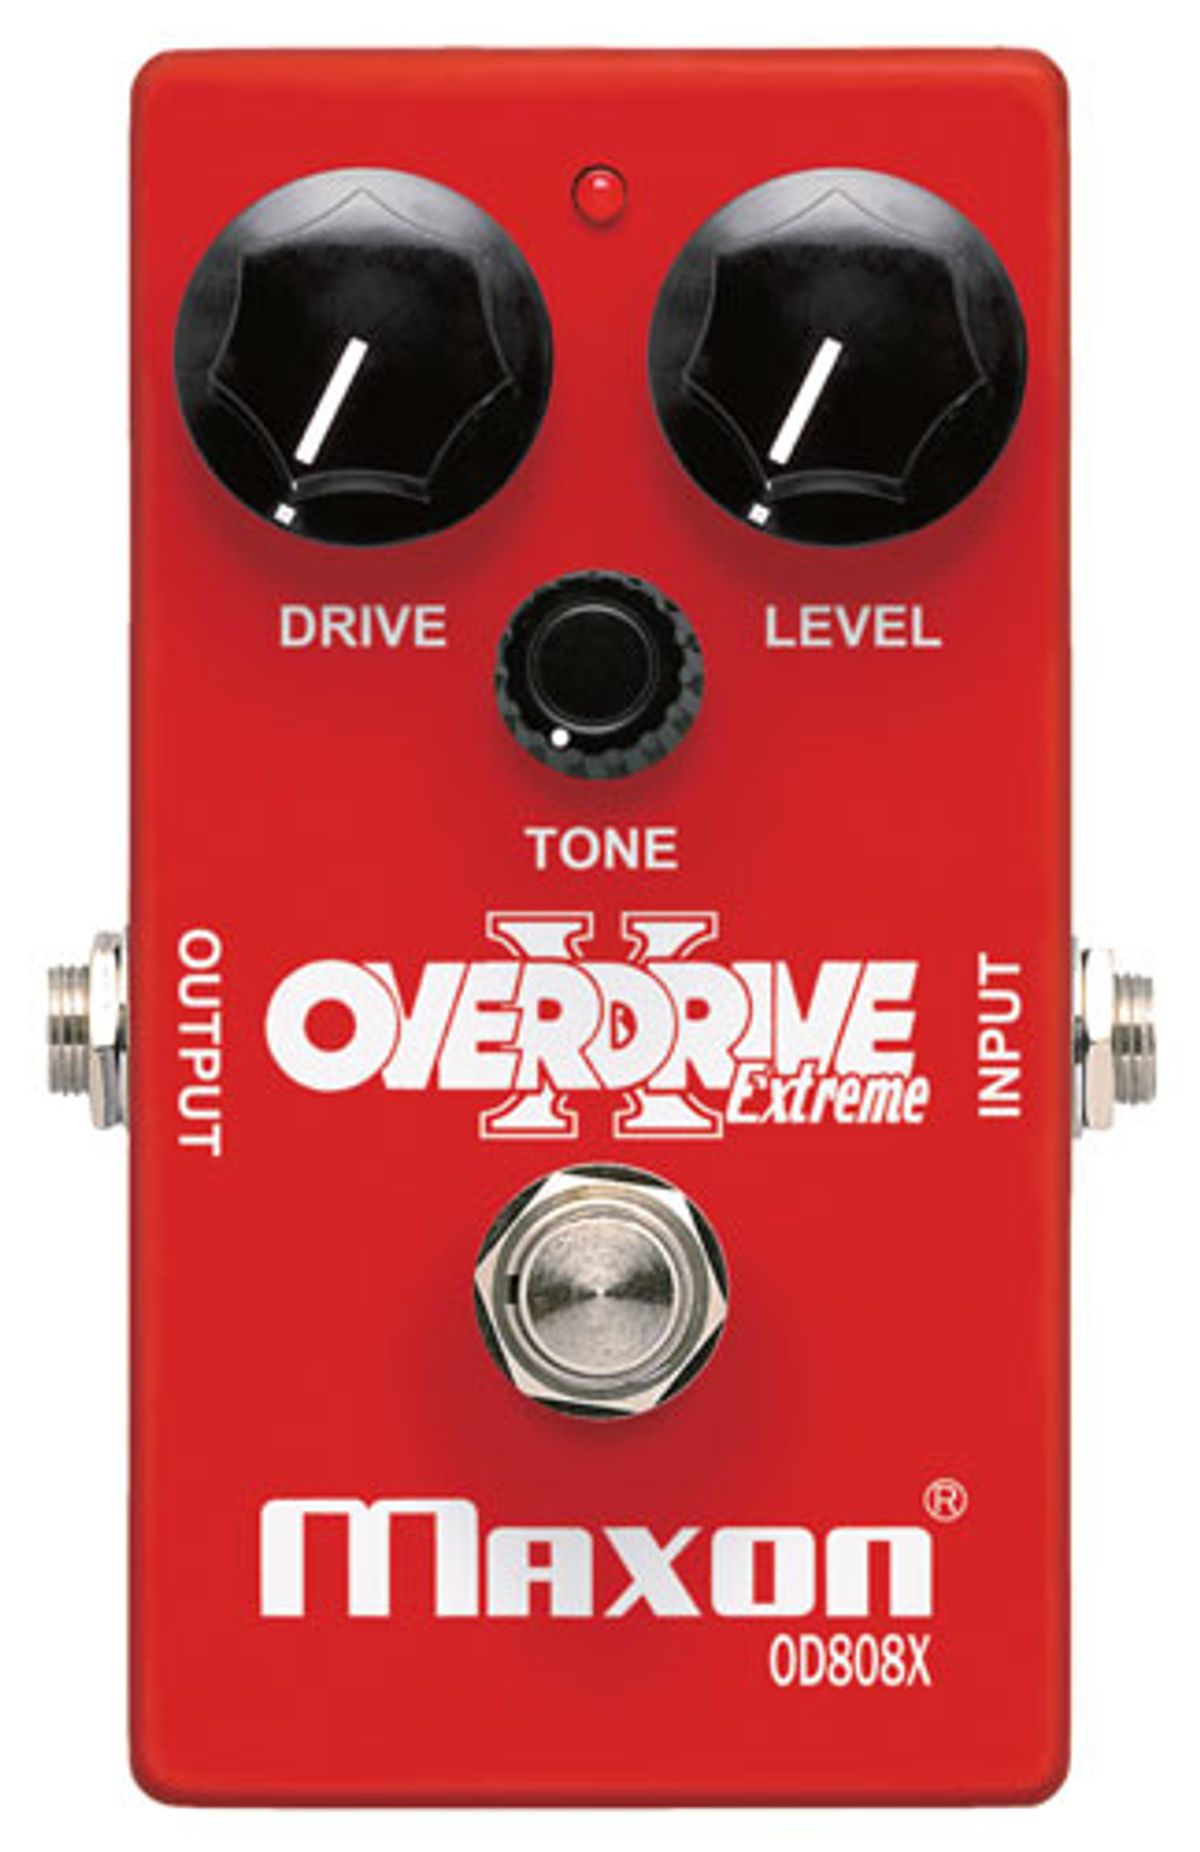 Maxon Releases the OD808X Overdrive Extreme